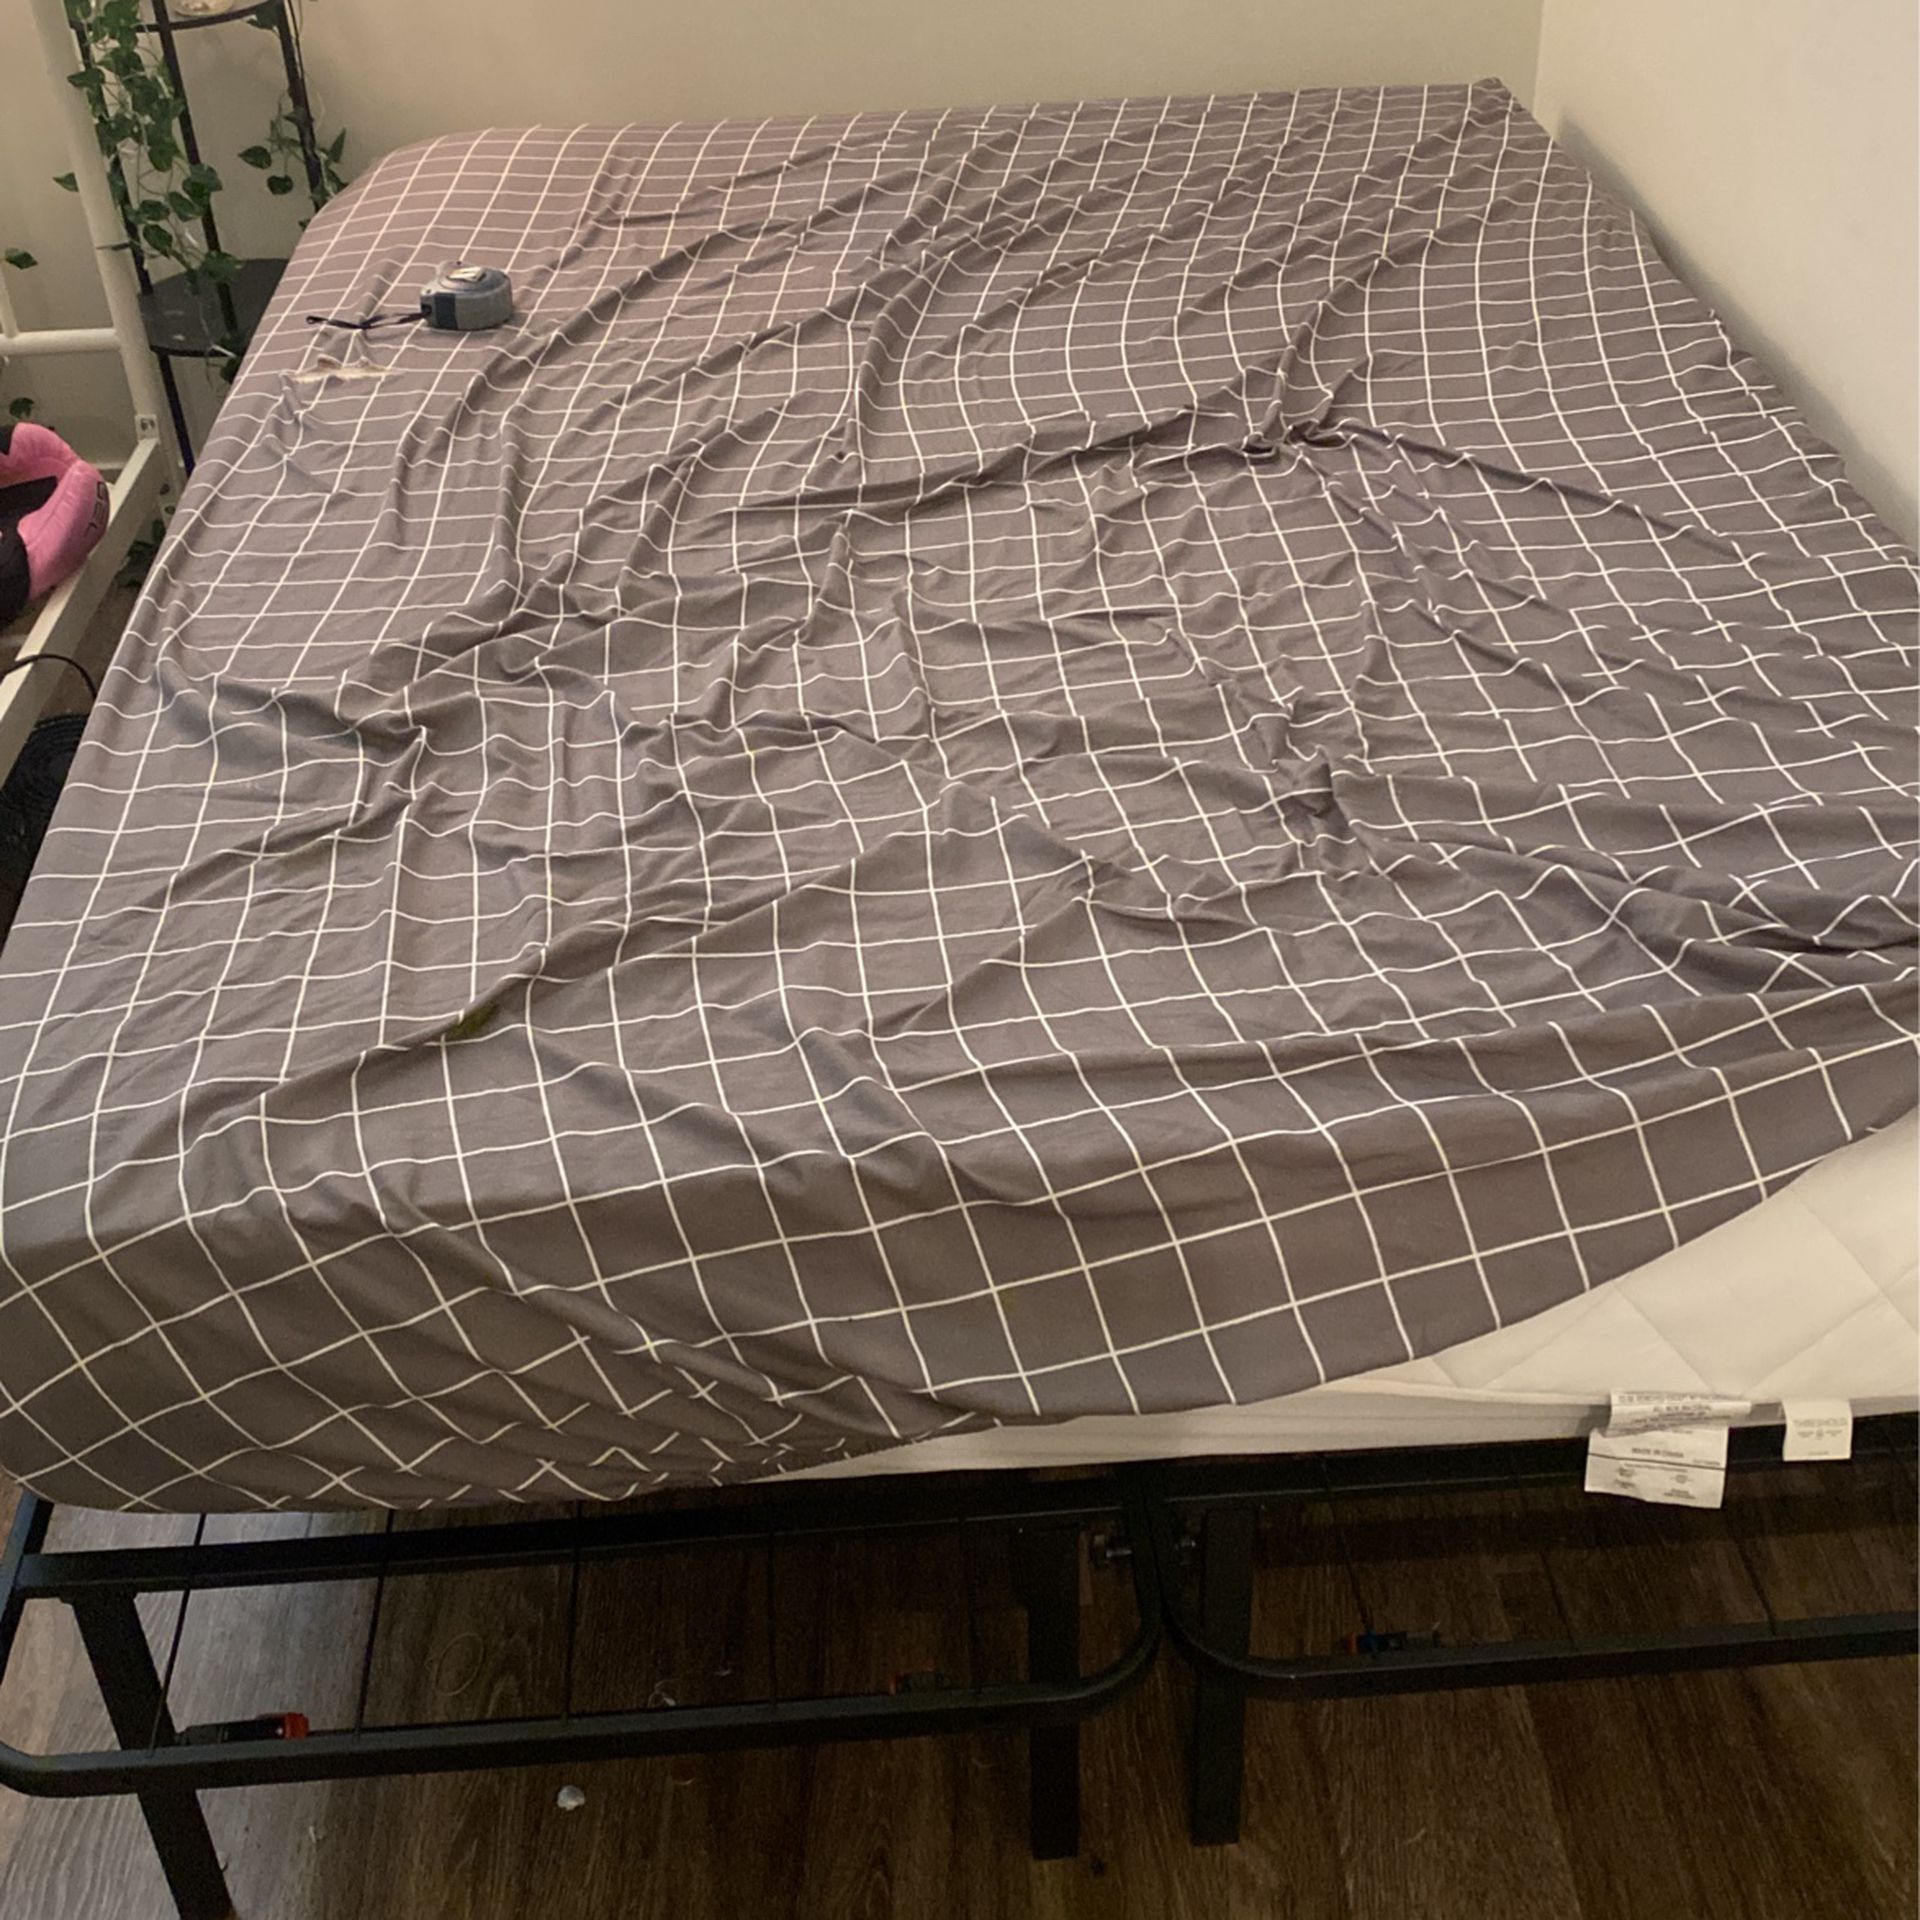 Full Size Bed With Bed Frame 